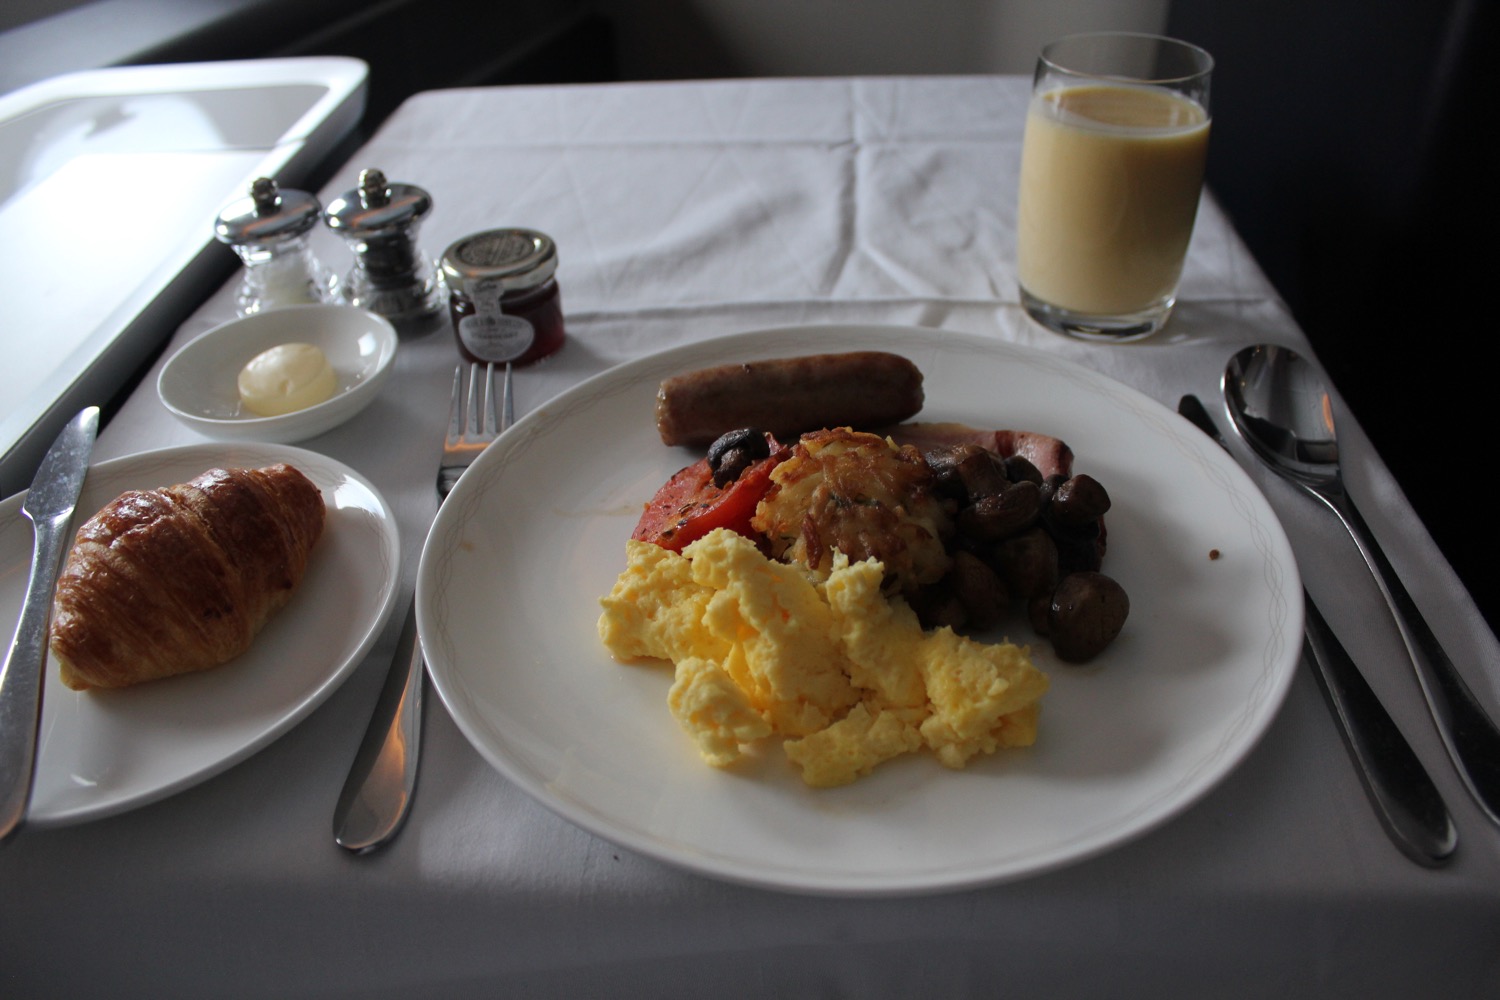 British Airways A380 First Class Review - 39